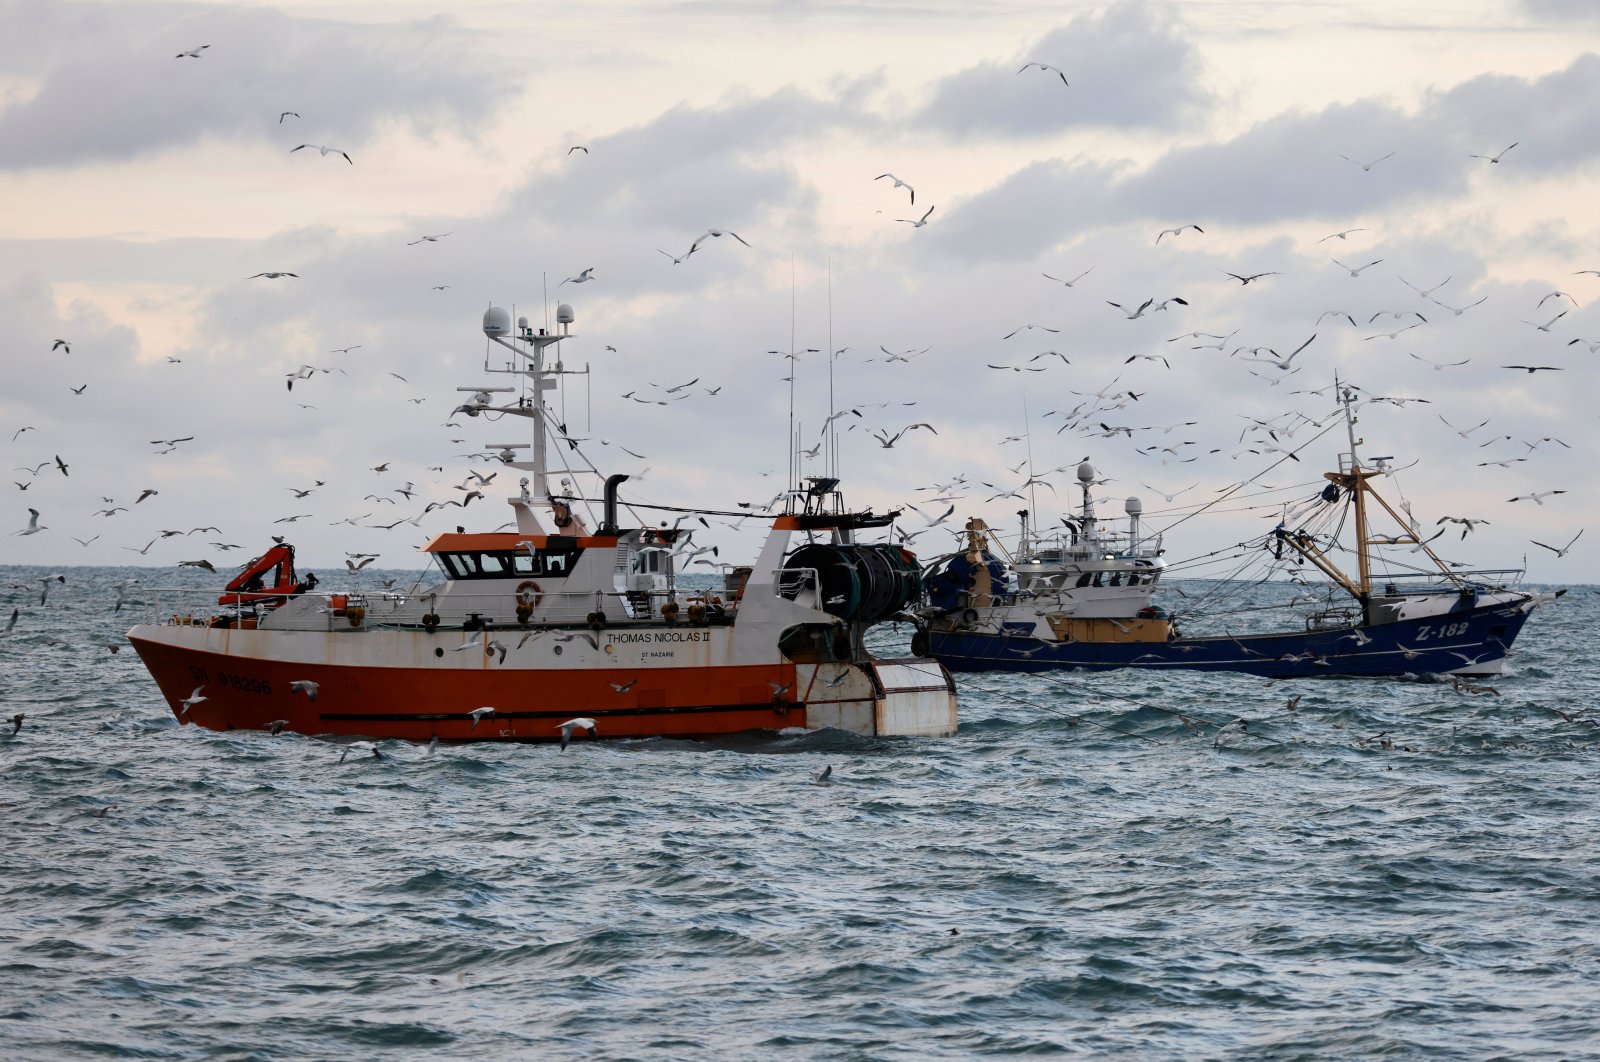 In this file photo, the French trawler "Thomas Nicolas II" sails past a Dutch trawler in the North Sea, off the coast of northern France, Dec. 7, 2020. (Reuters Photo)